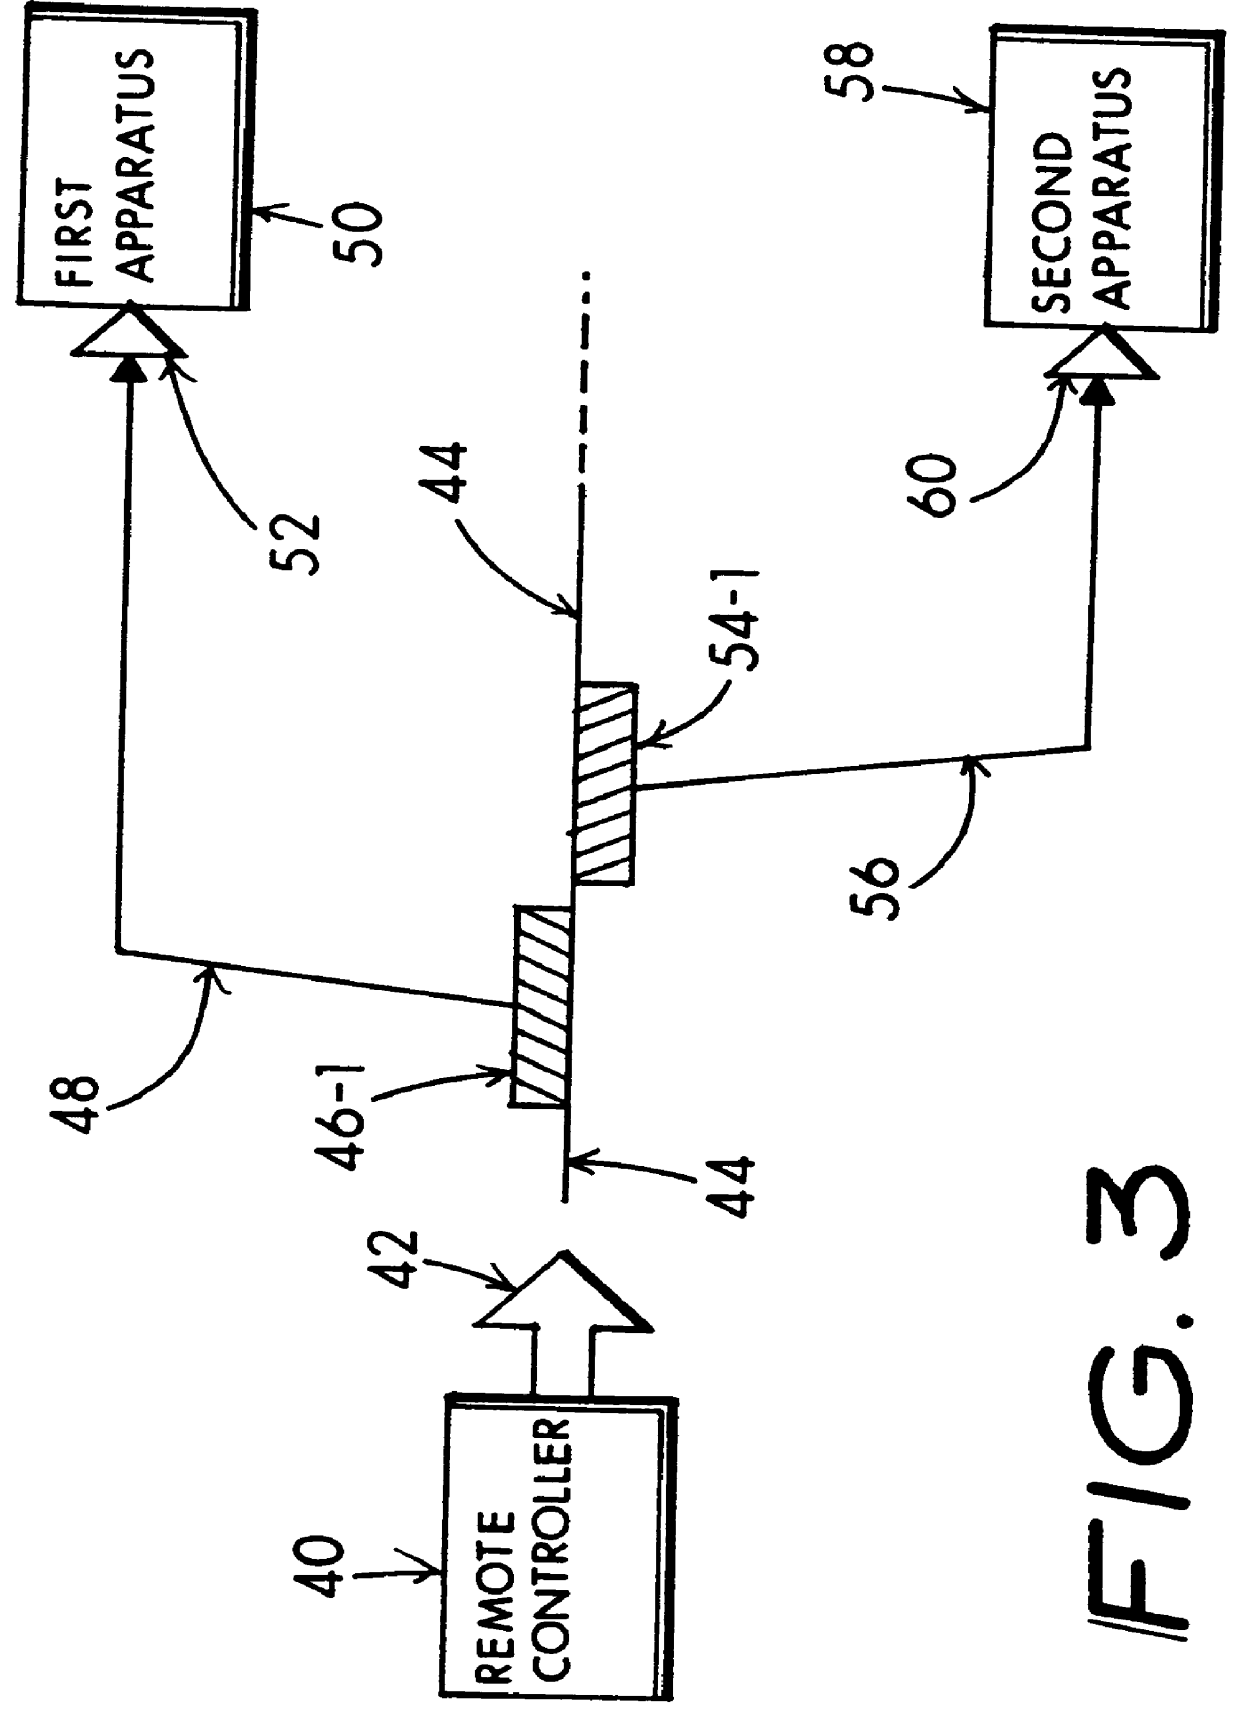 Remote control for a television enabling a user to enter and review a channel selection choice immediately prior to sending an encoded channel selection command to the television